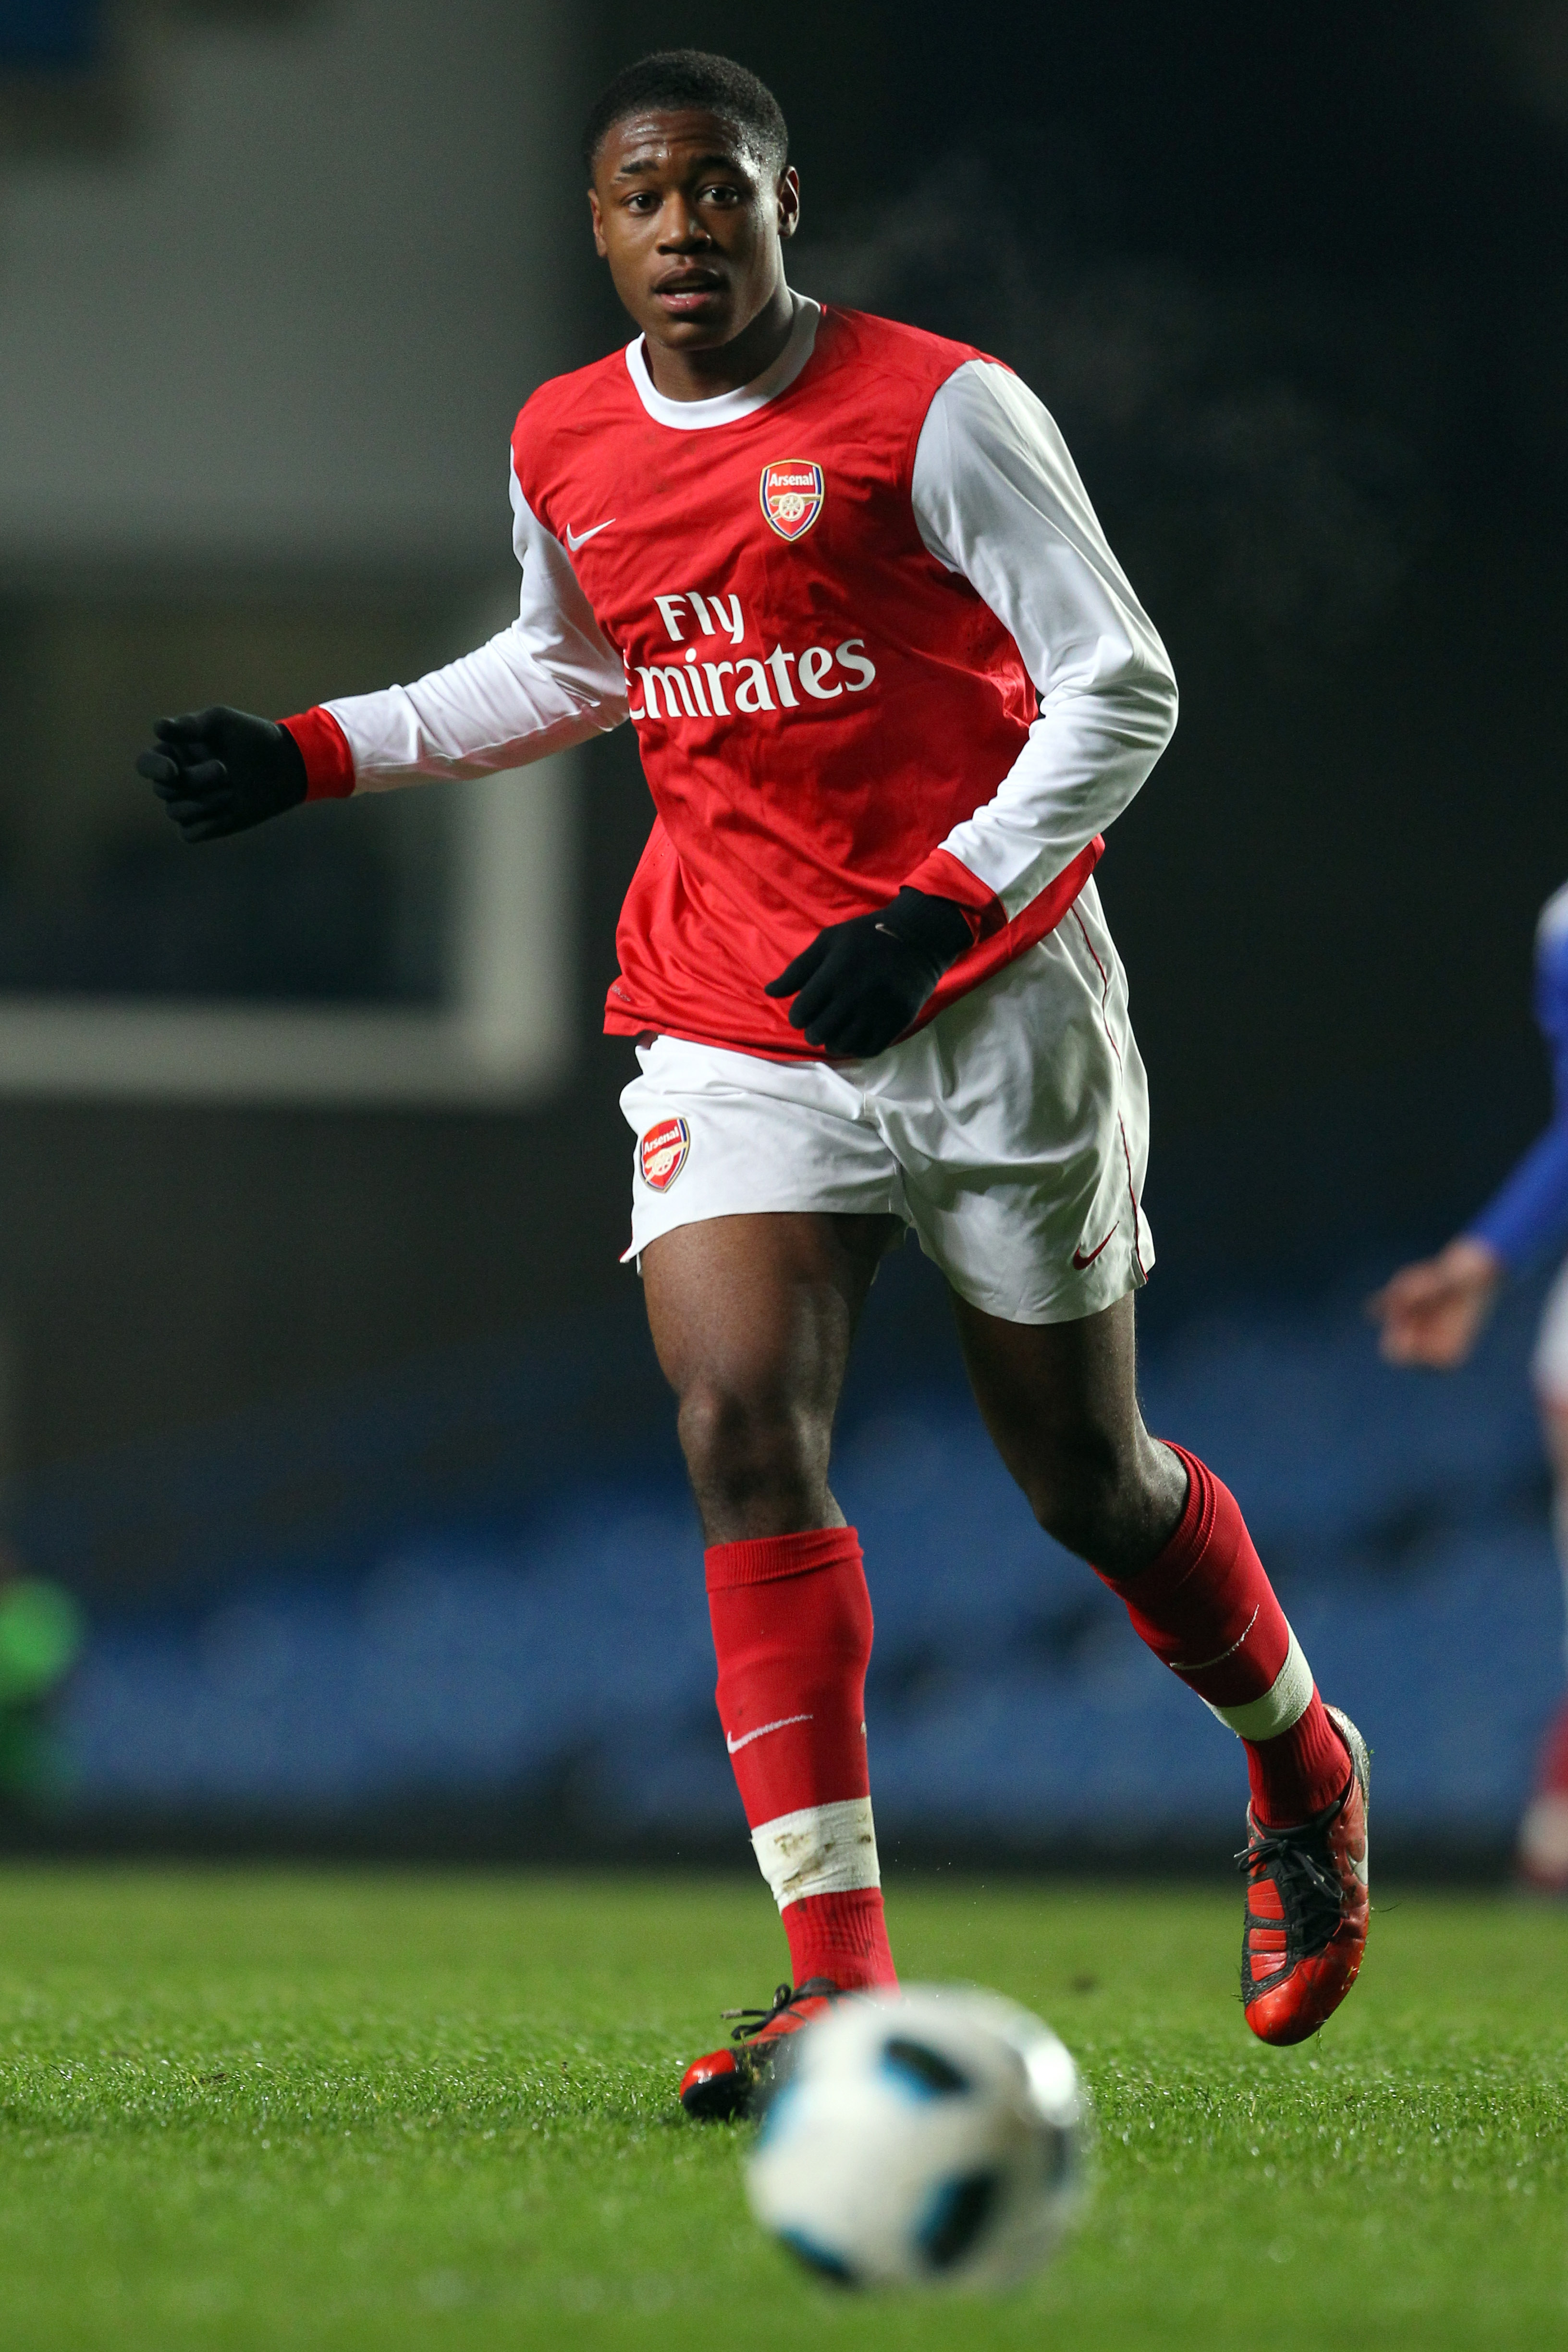 LONDON, ENGLAND - JANUARY 20: Chuks Aneke of Arsenal in action during the FA Youth Cup match between Chelsea and Arsenal at Stamford Bridge on January 20, 2011 in London, England.  (Photo by Clive Rose/Getty Images)